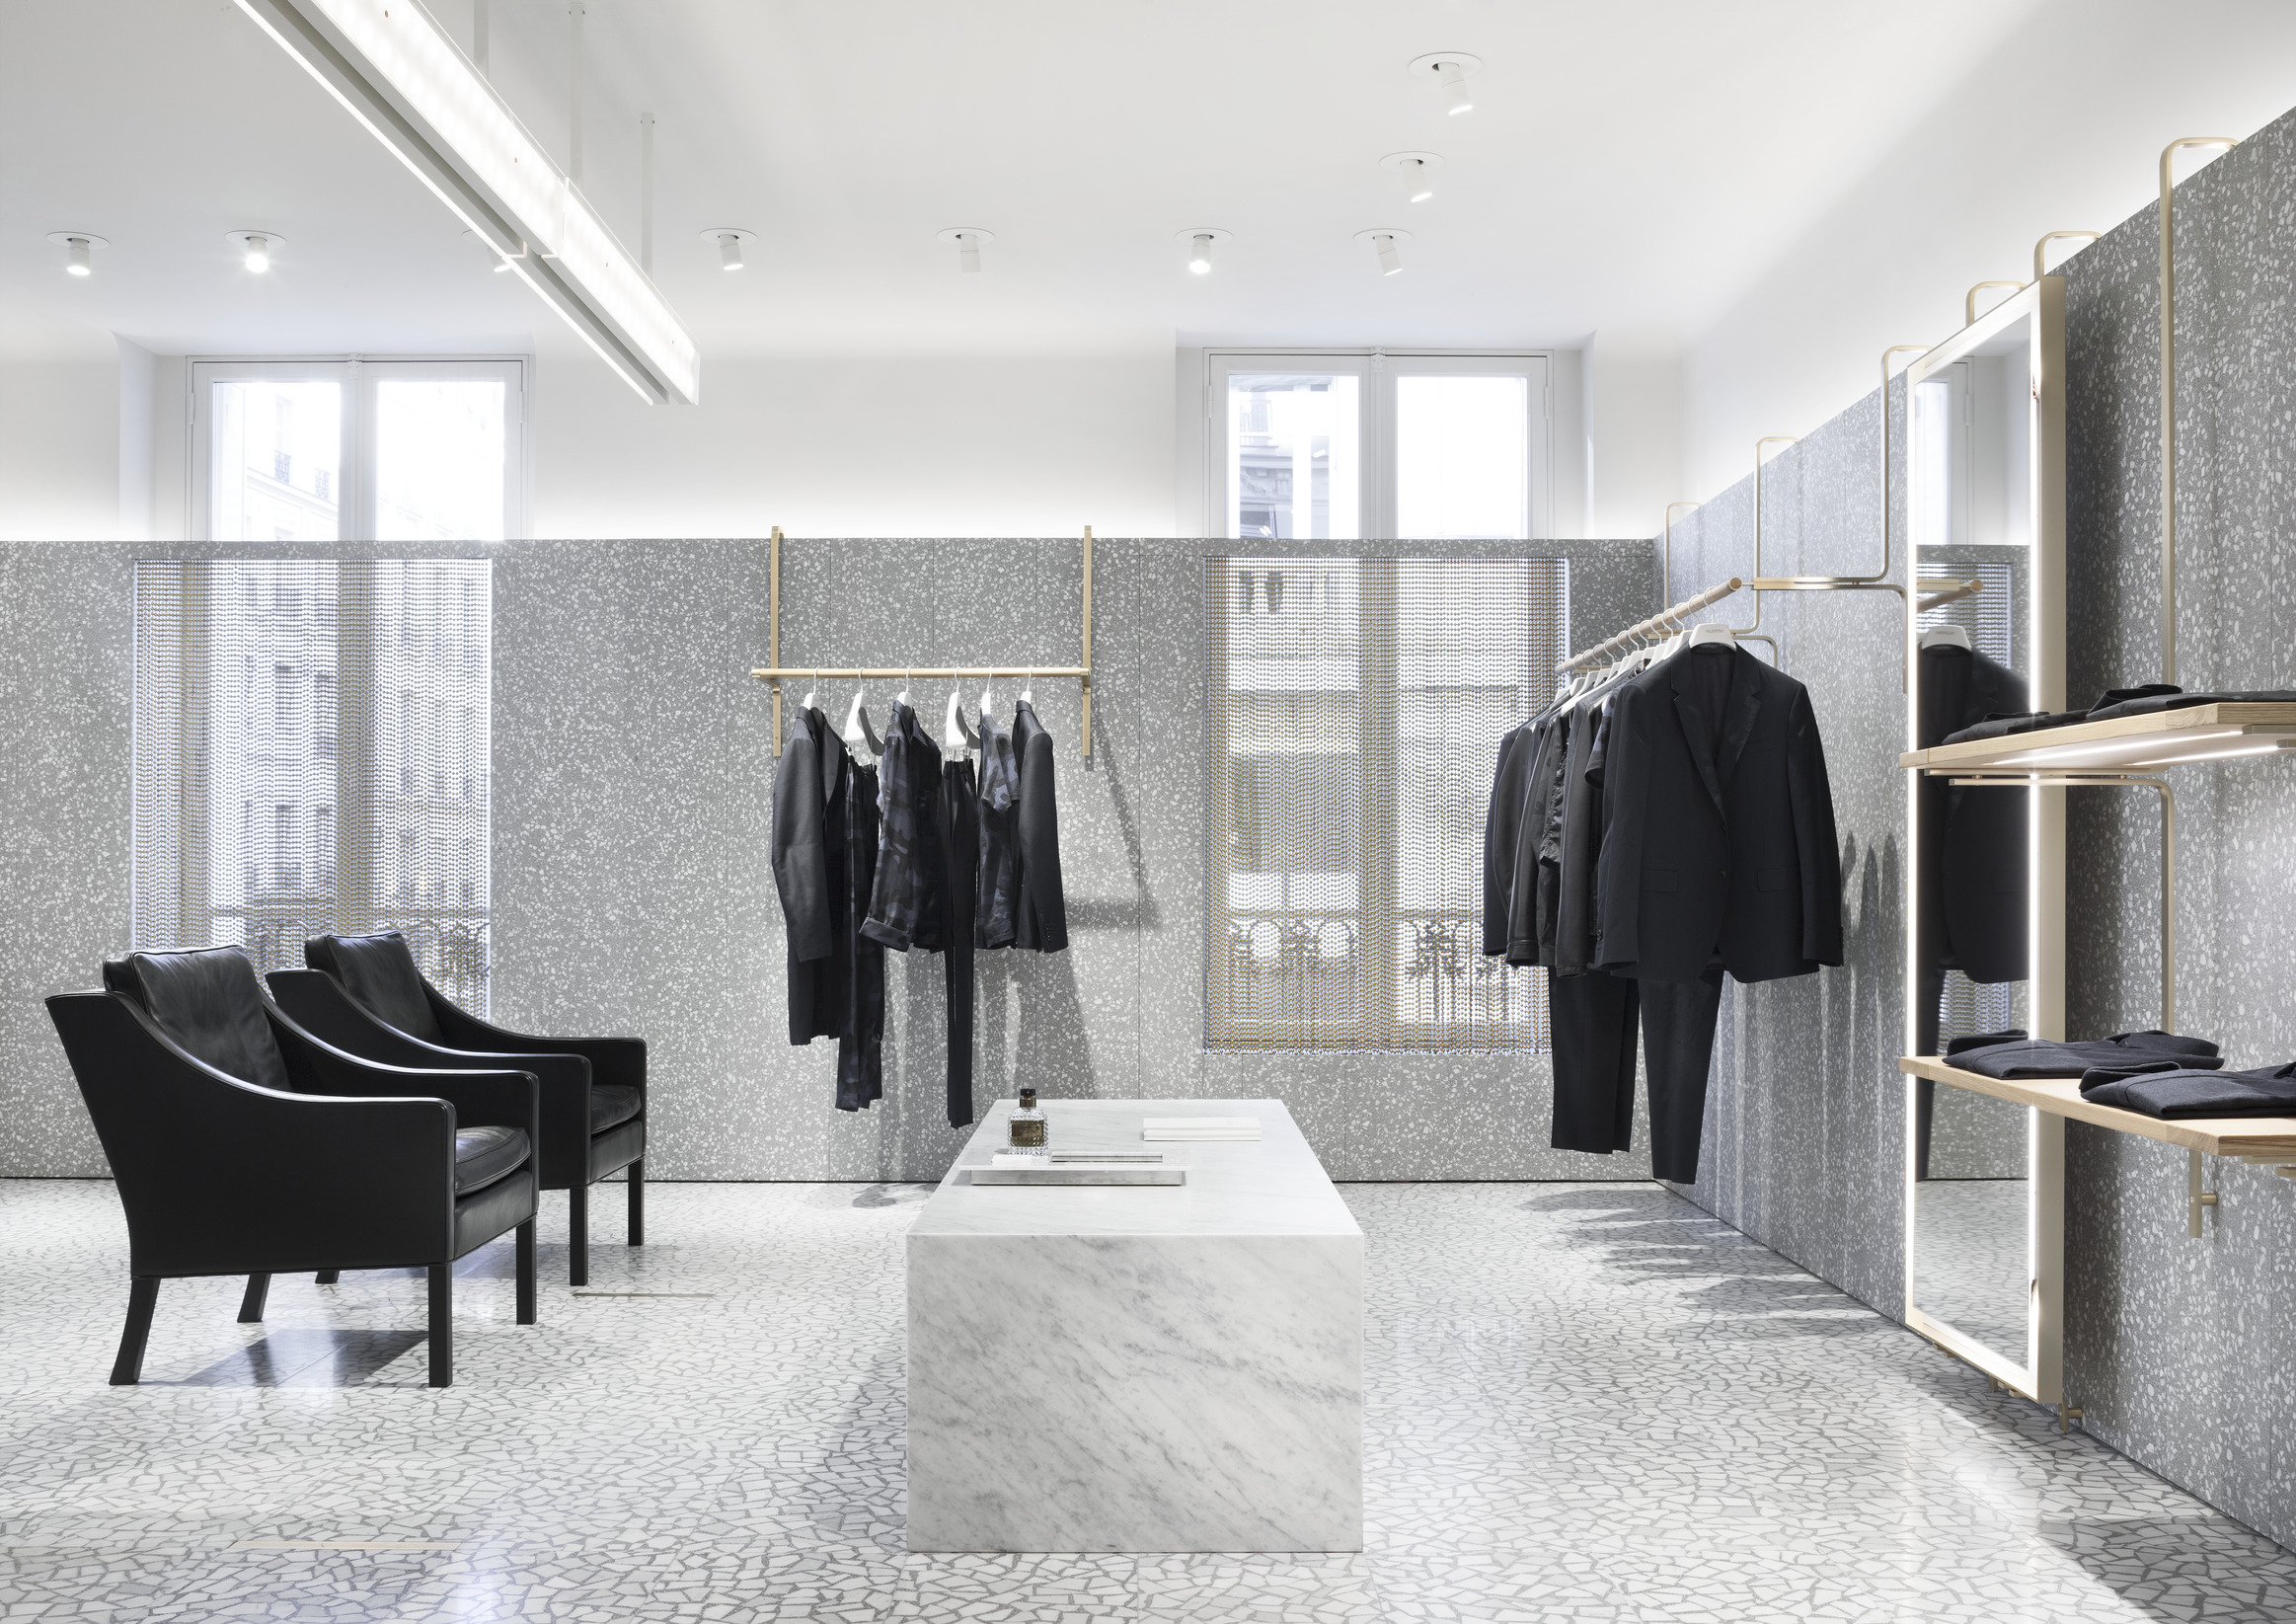 Located in Saint-Honoré in Paris, the Valentino Man store is characterised by spaces with a strong articulation of walls and partitions.